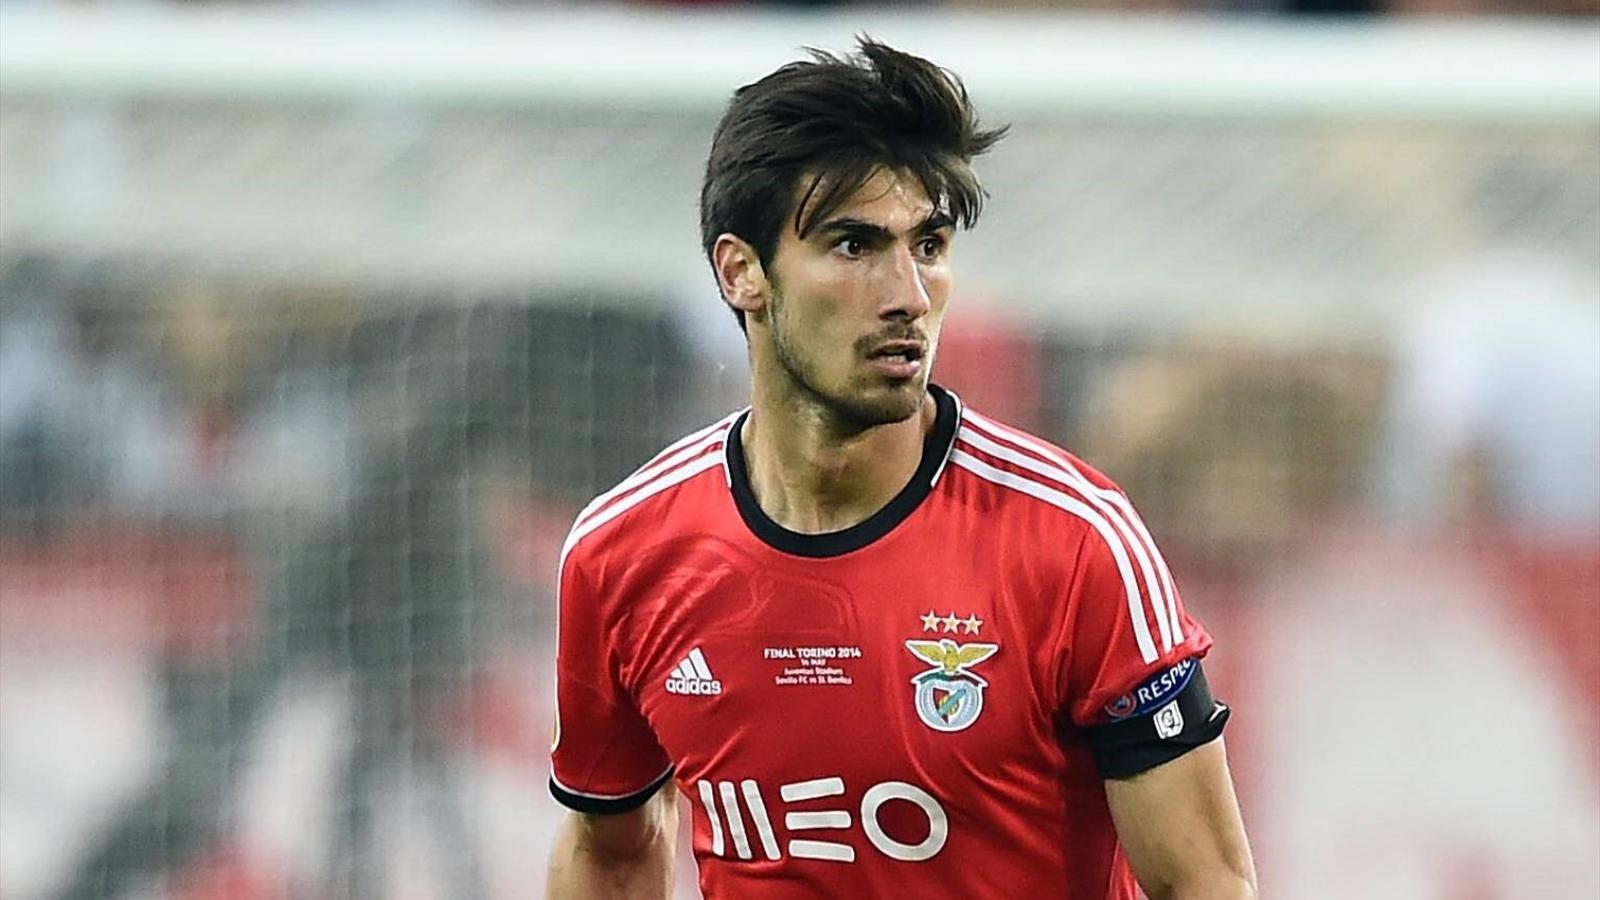 Andre Gomes signed for Valencia